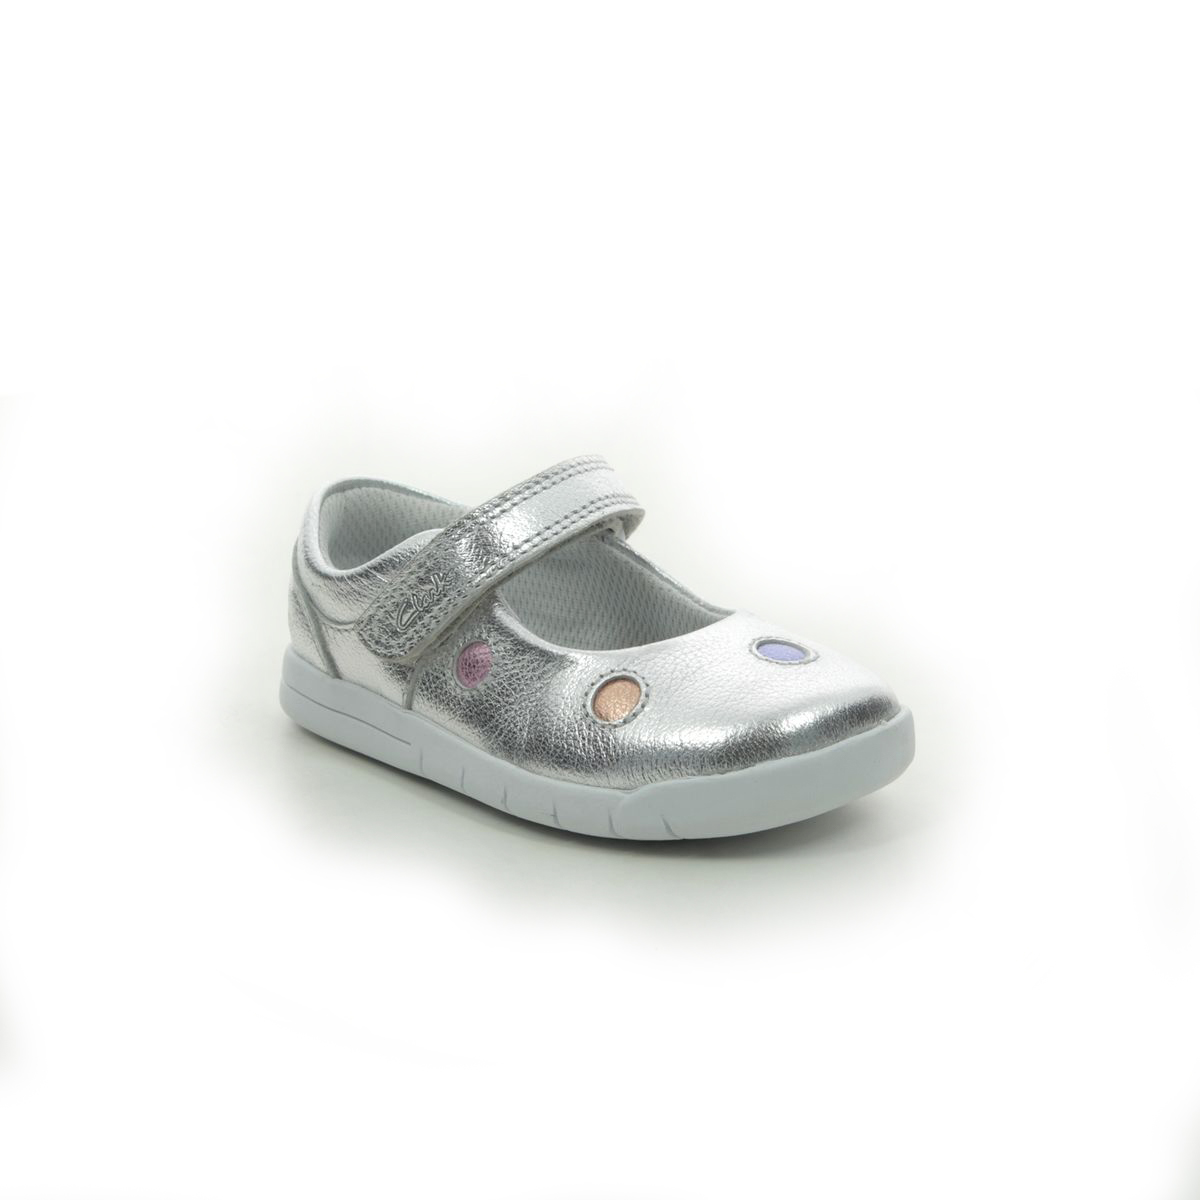 Clarks Emery Dot T Silver Leather Kids first shoes 5664-57G in a Plain Leather in Size 4.5